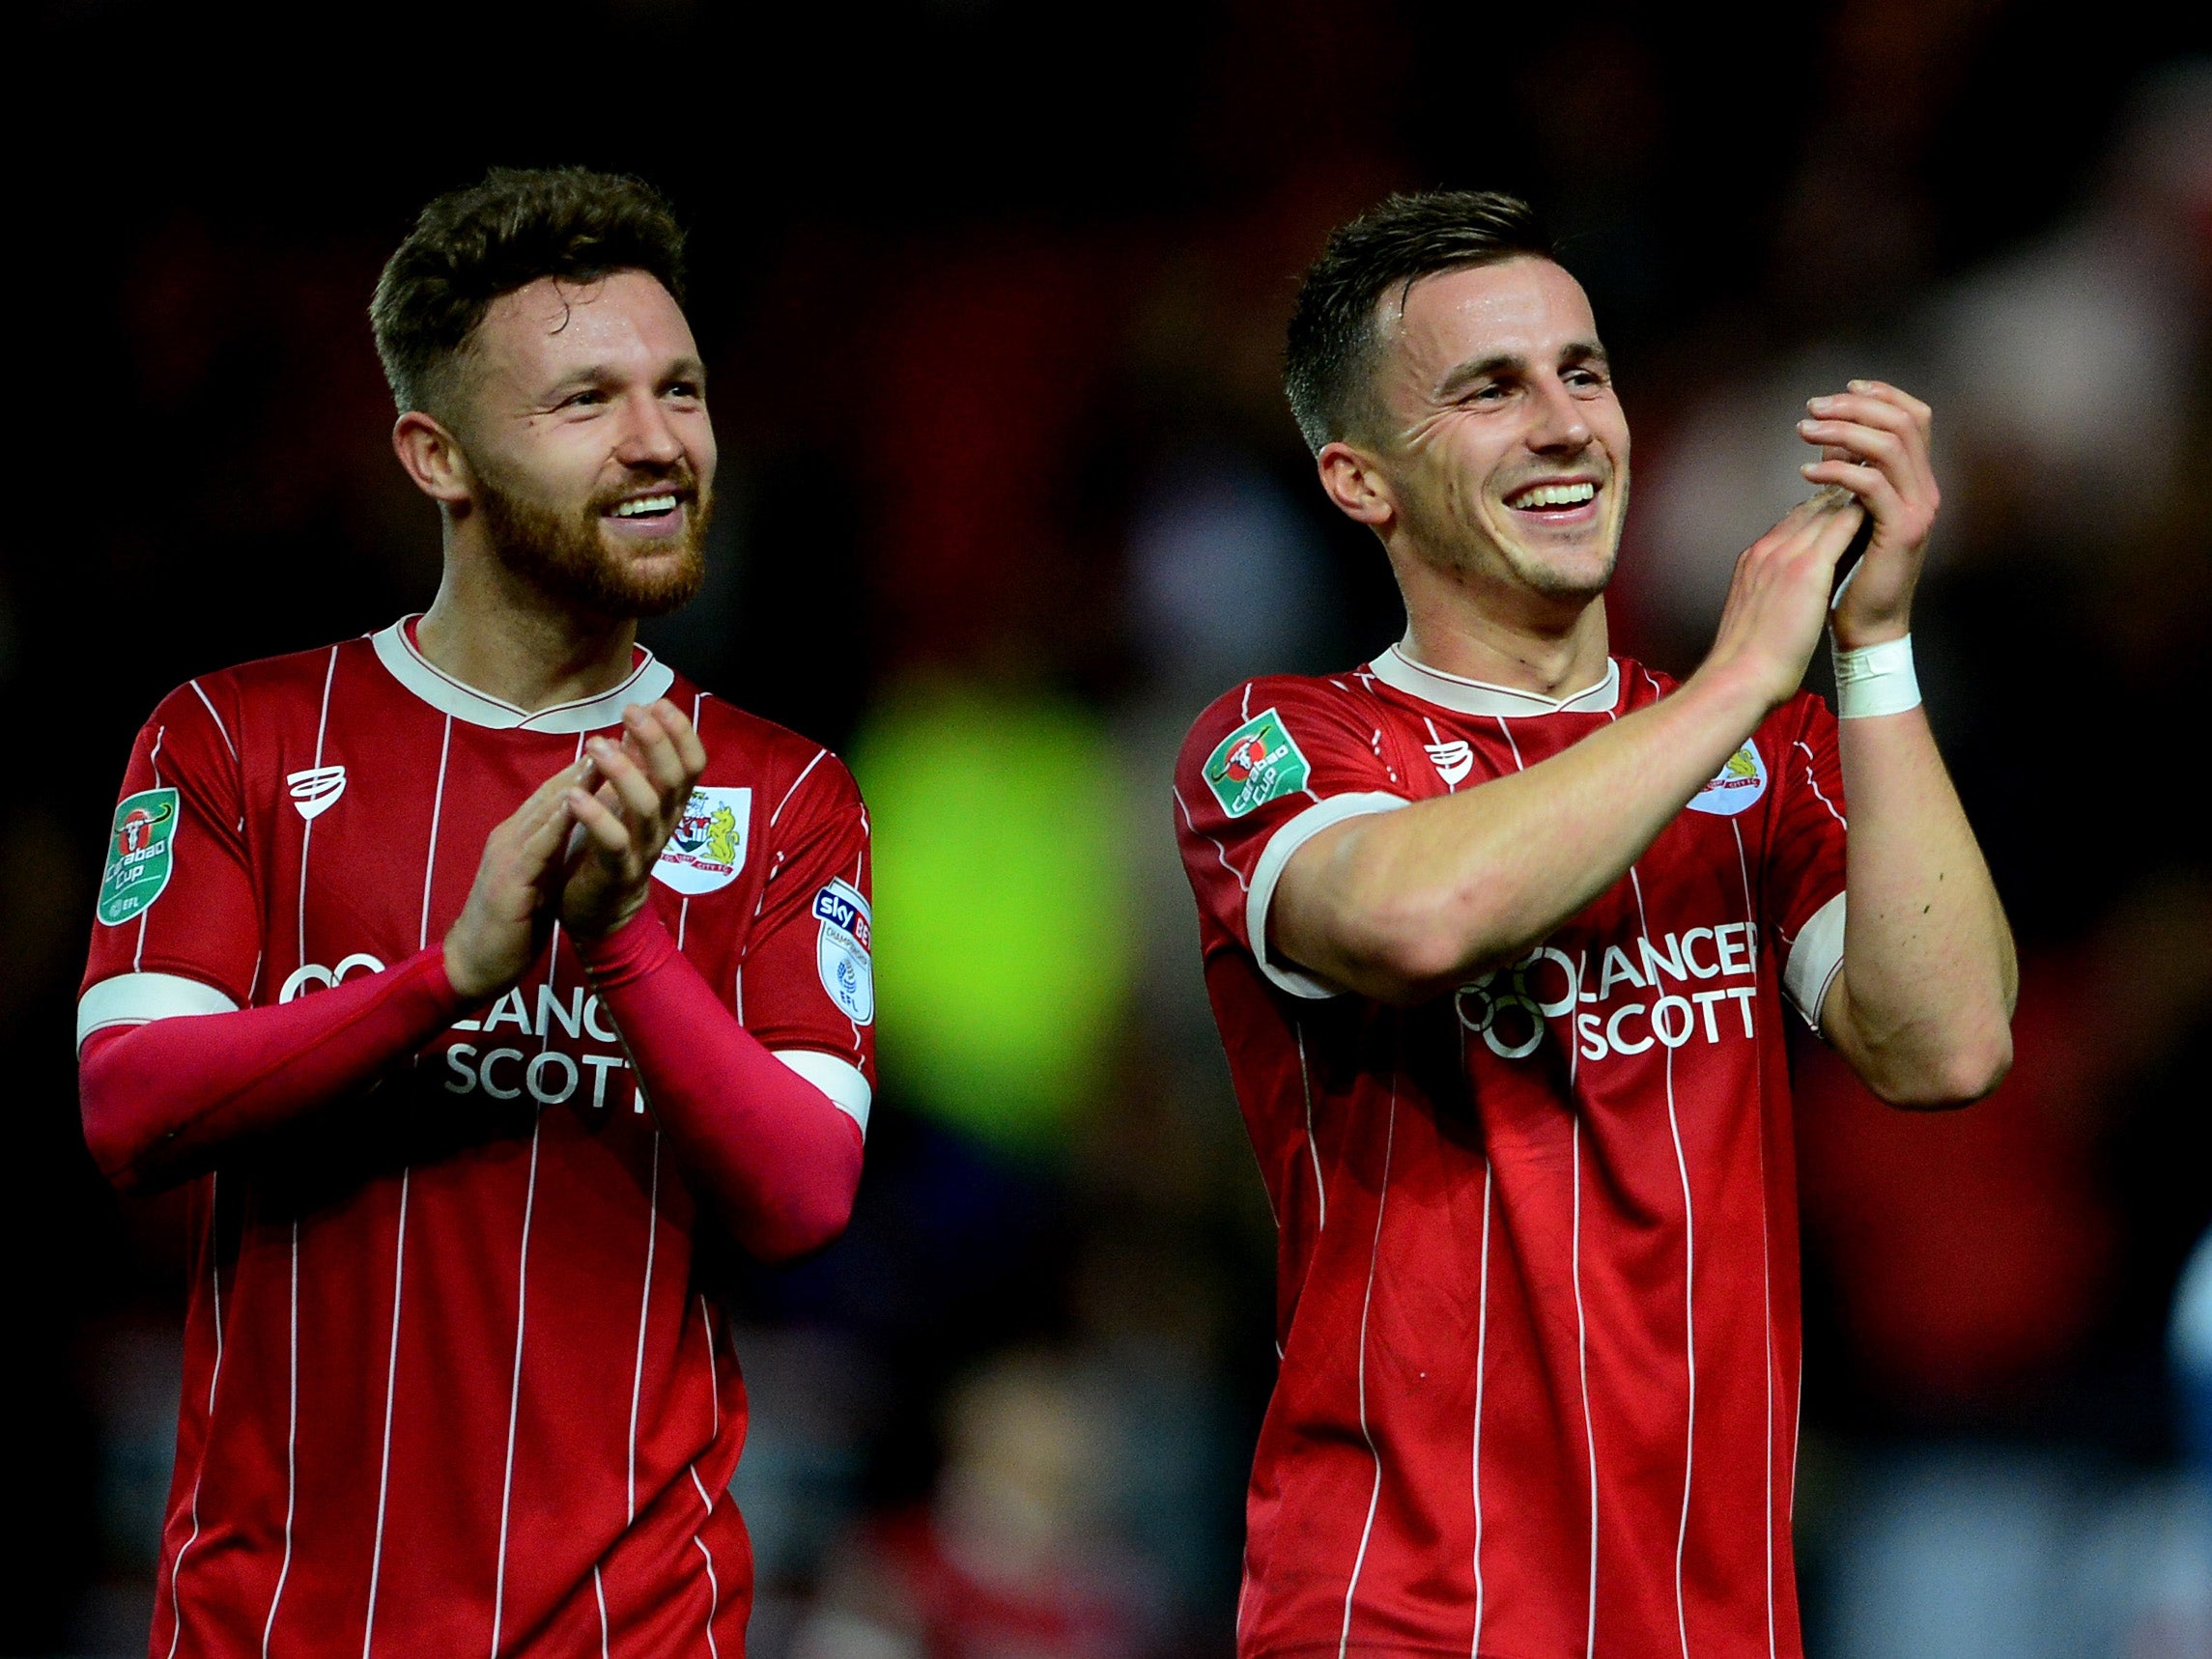 Bristol City thumped Crystal Palace in the fourth round